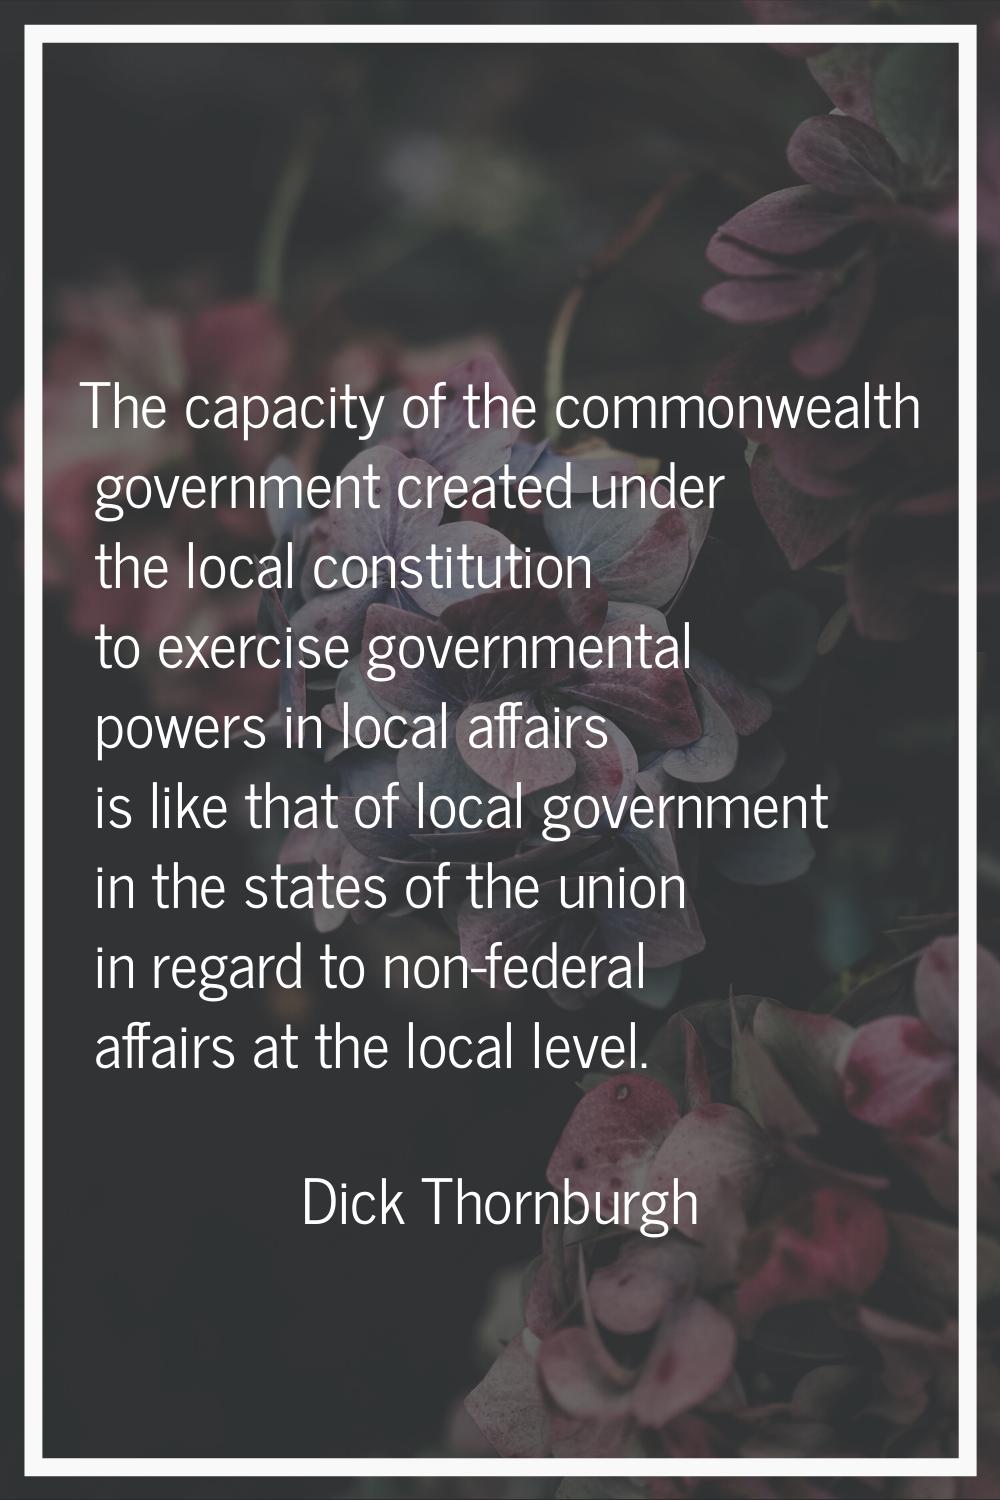 The capacity of the commonwealth government created under the local constitution to exercise govern